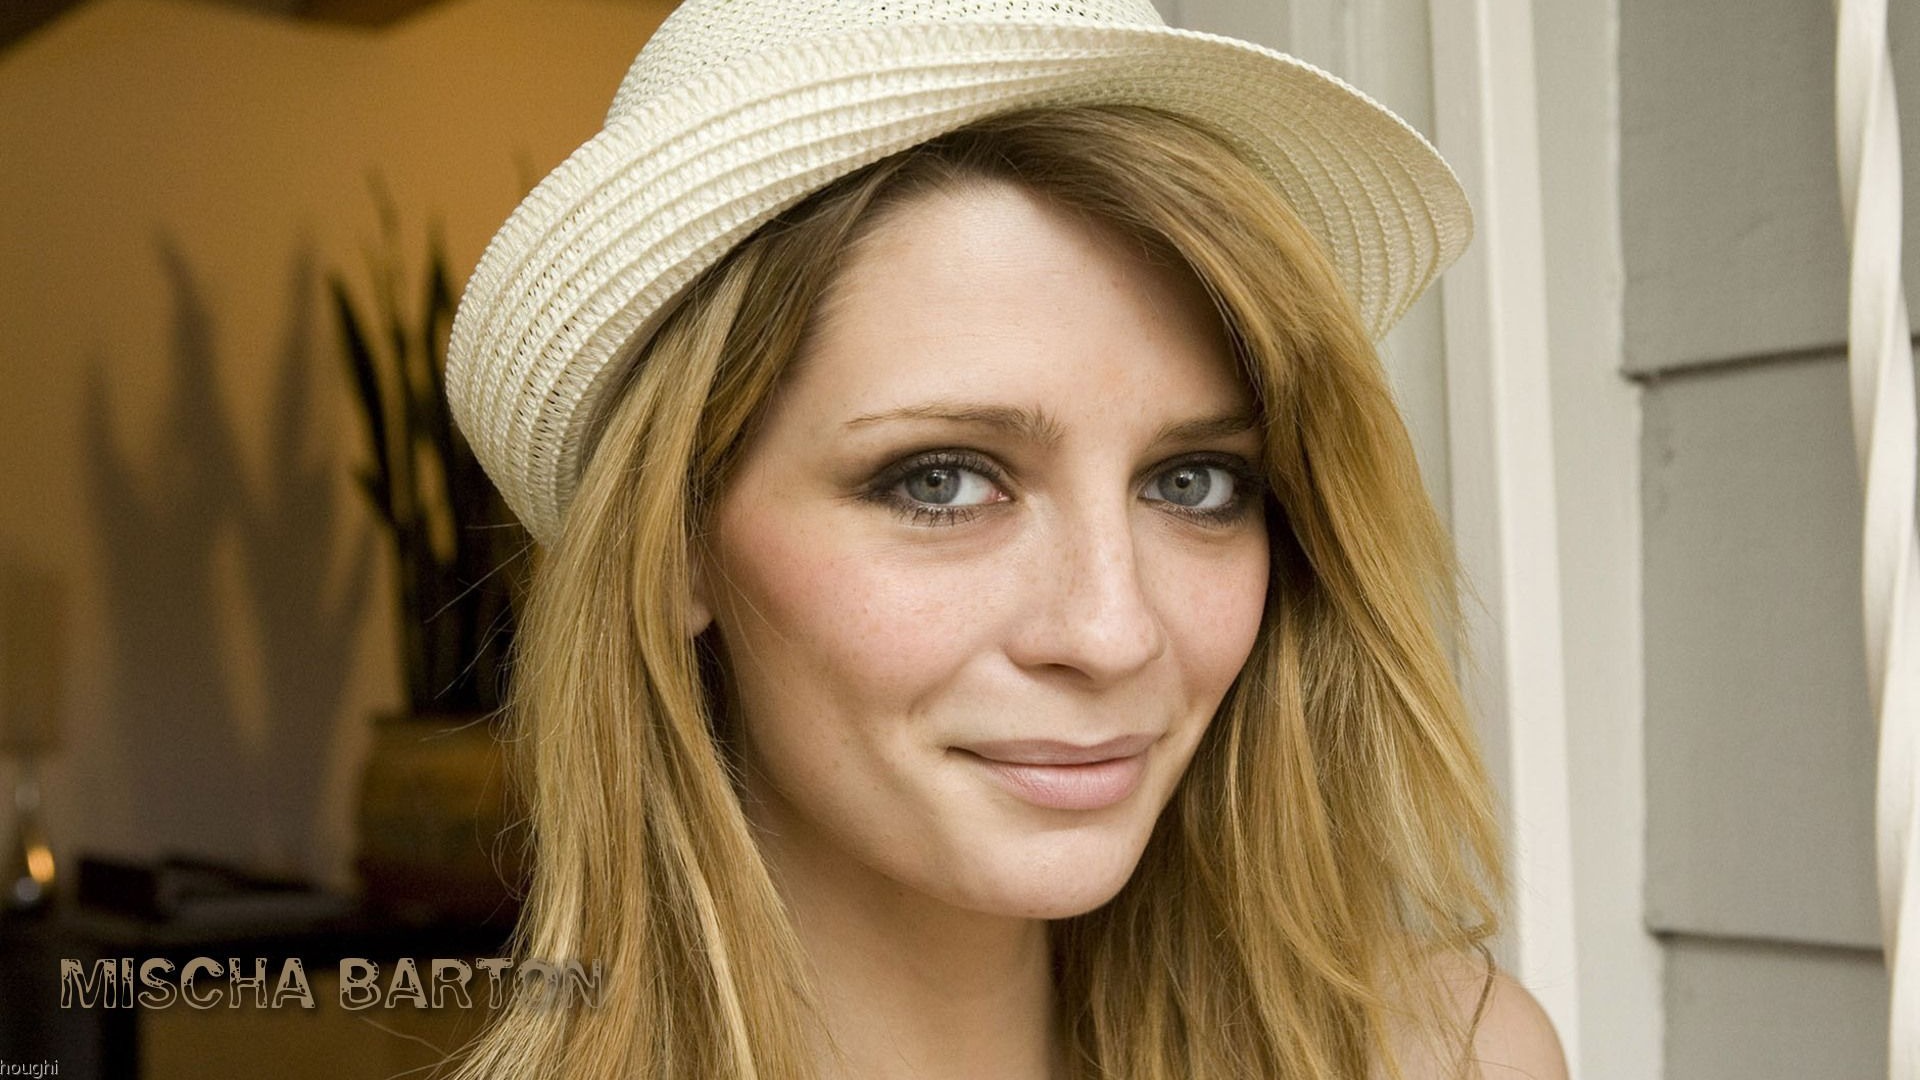 Mischa Barton #077 - 1920x1080 Wallpapers Pictures Photos Images